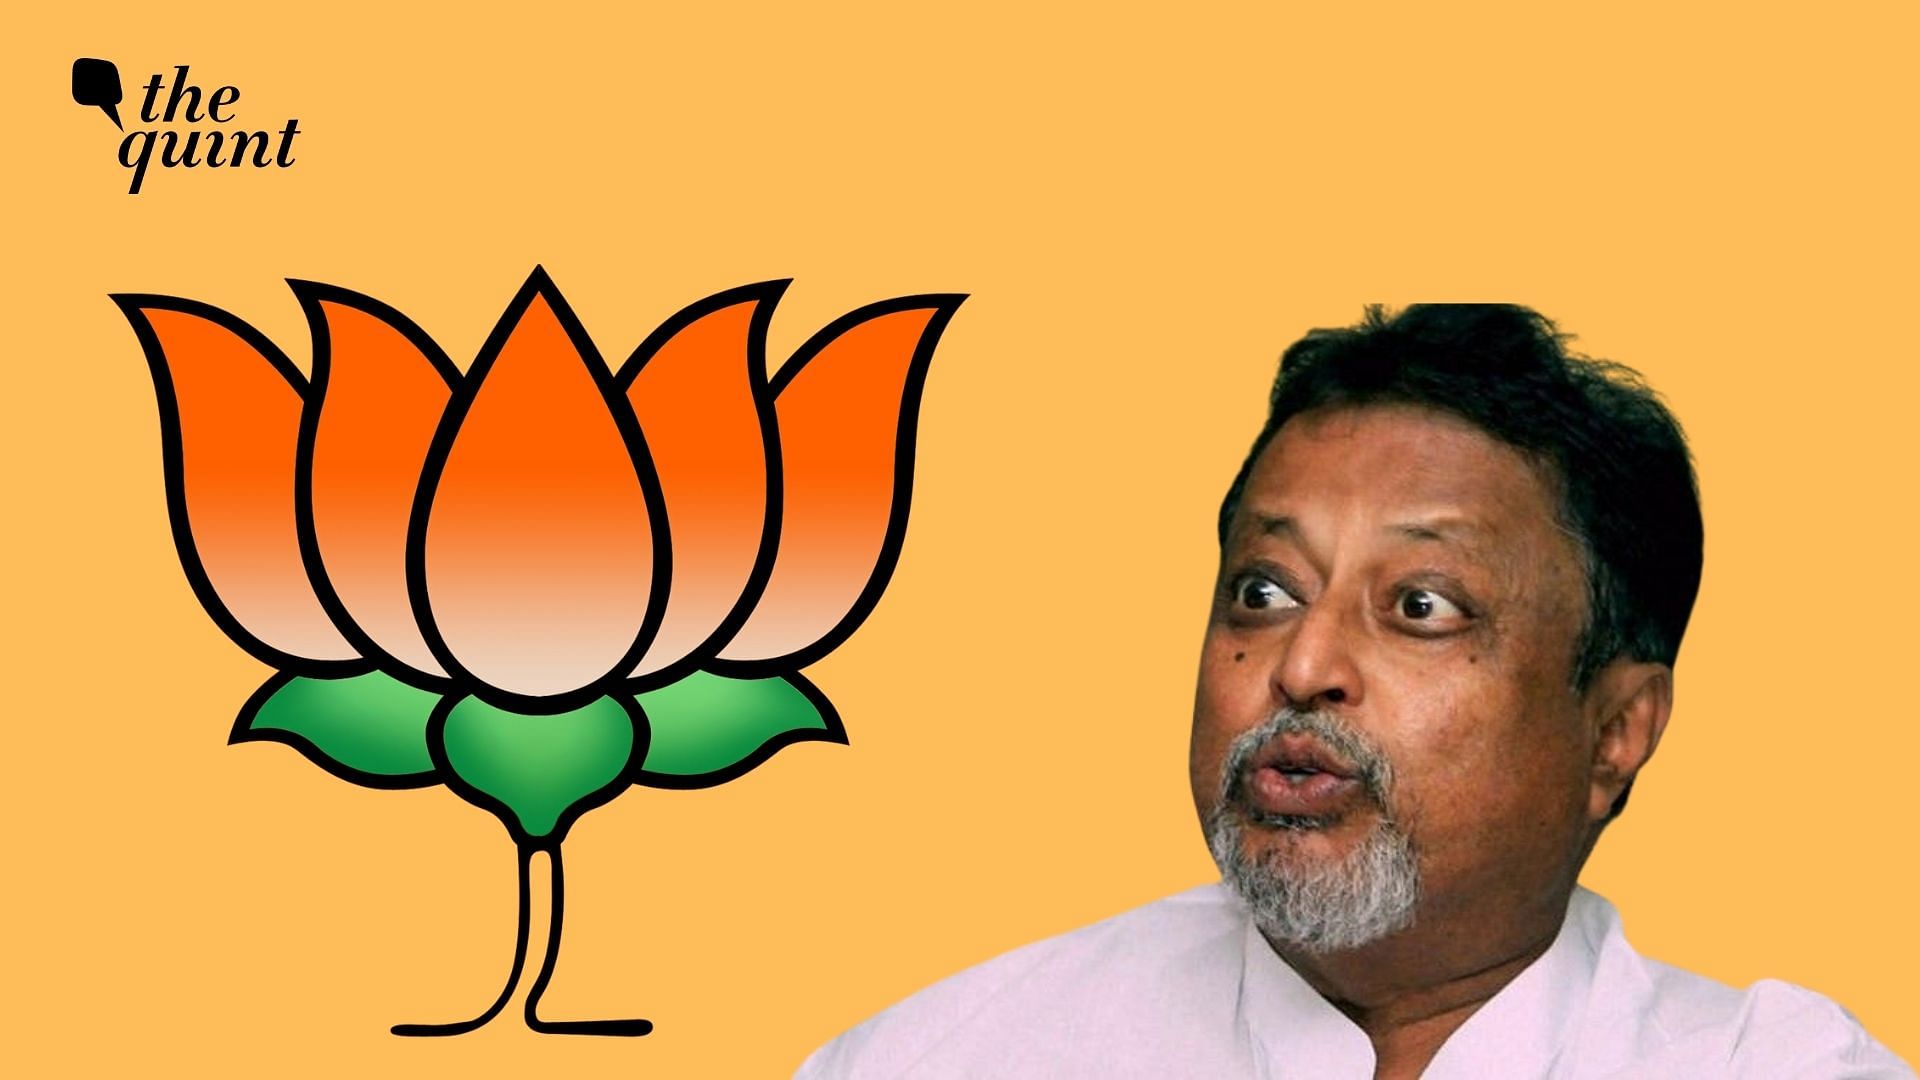 The Bharatiya Janata Party (BJP) national vice-president Mukul Roy will be fighting the upcoming West Bengal elections from Krishnanagar Uttar, as per the BJP’s latest list.